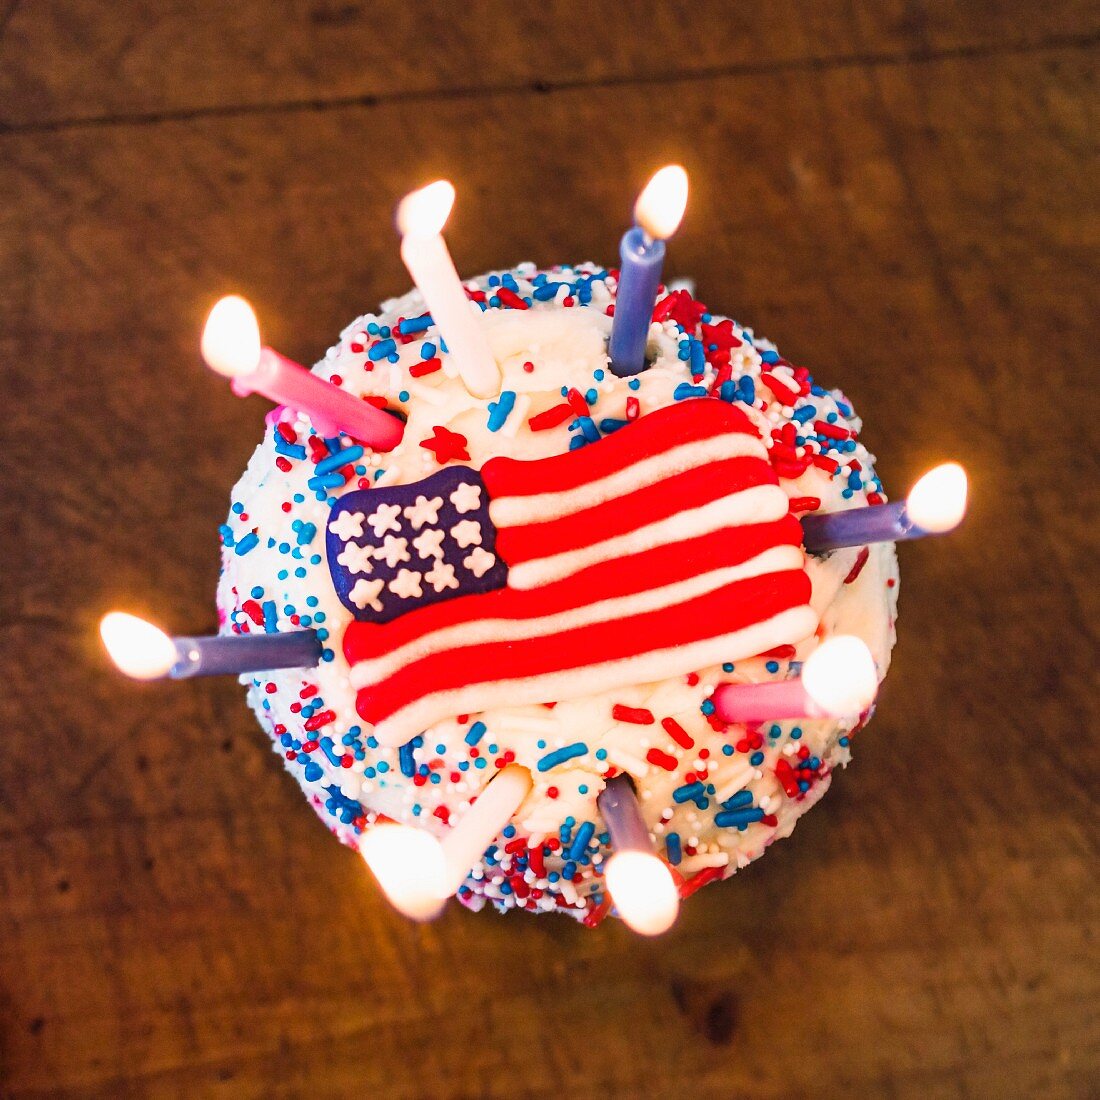 Birthday cake with American flag